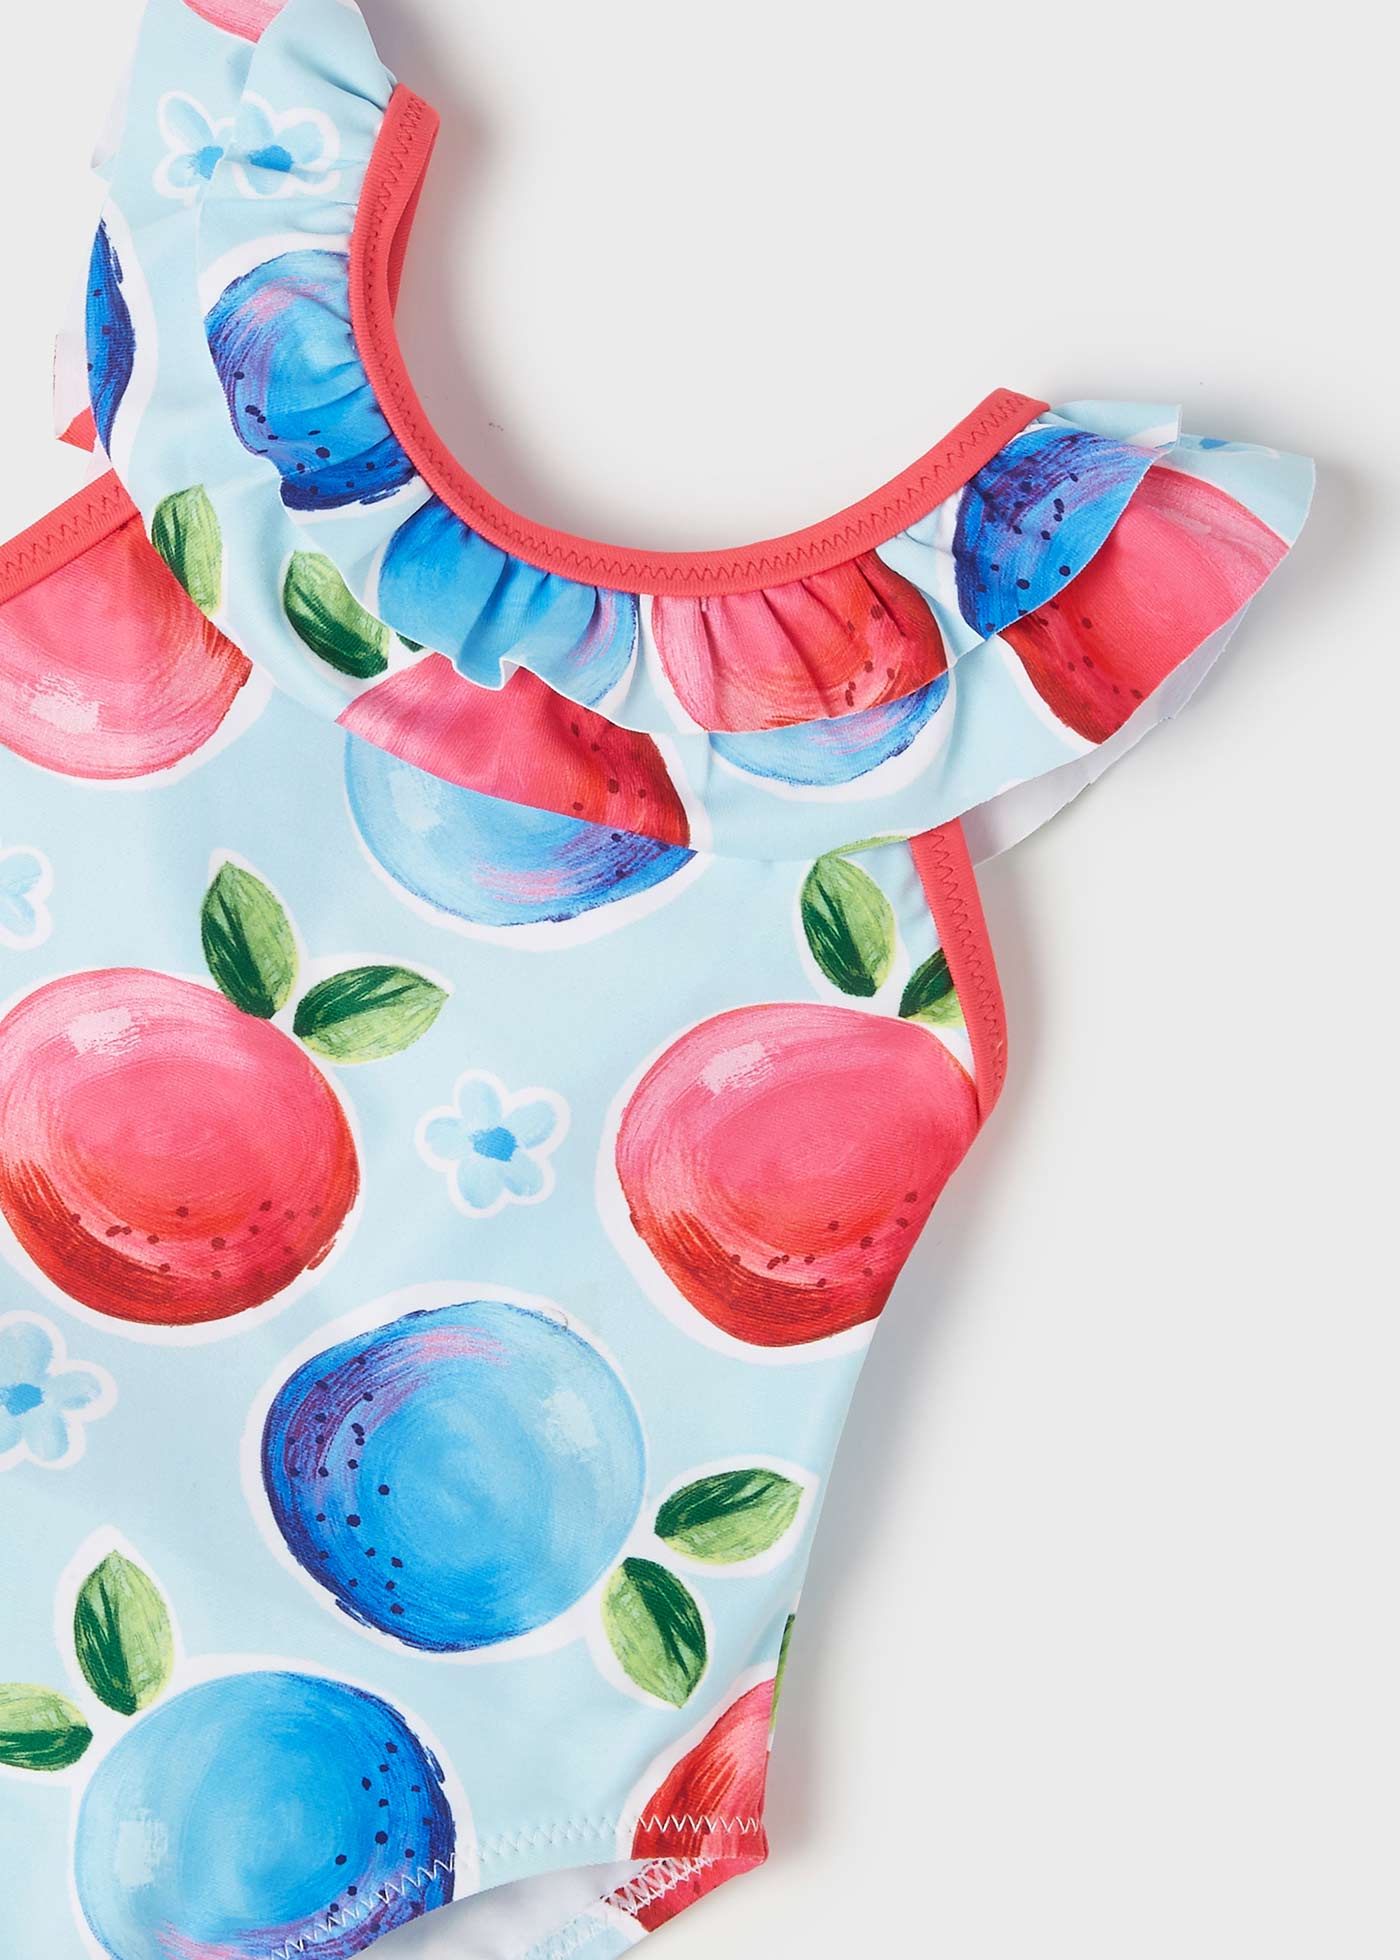 Mayoral Mayoral Fruit Print Swimsuit for Baby Girl - Little Miss Muffin Children & Home